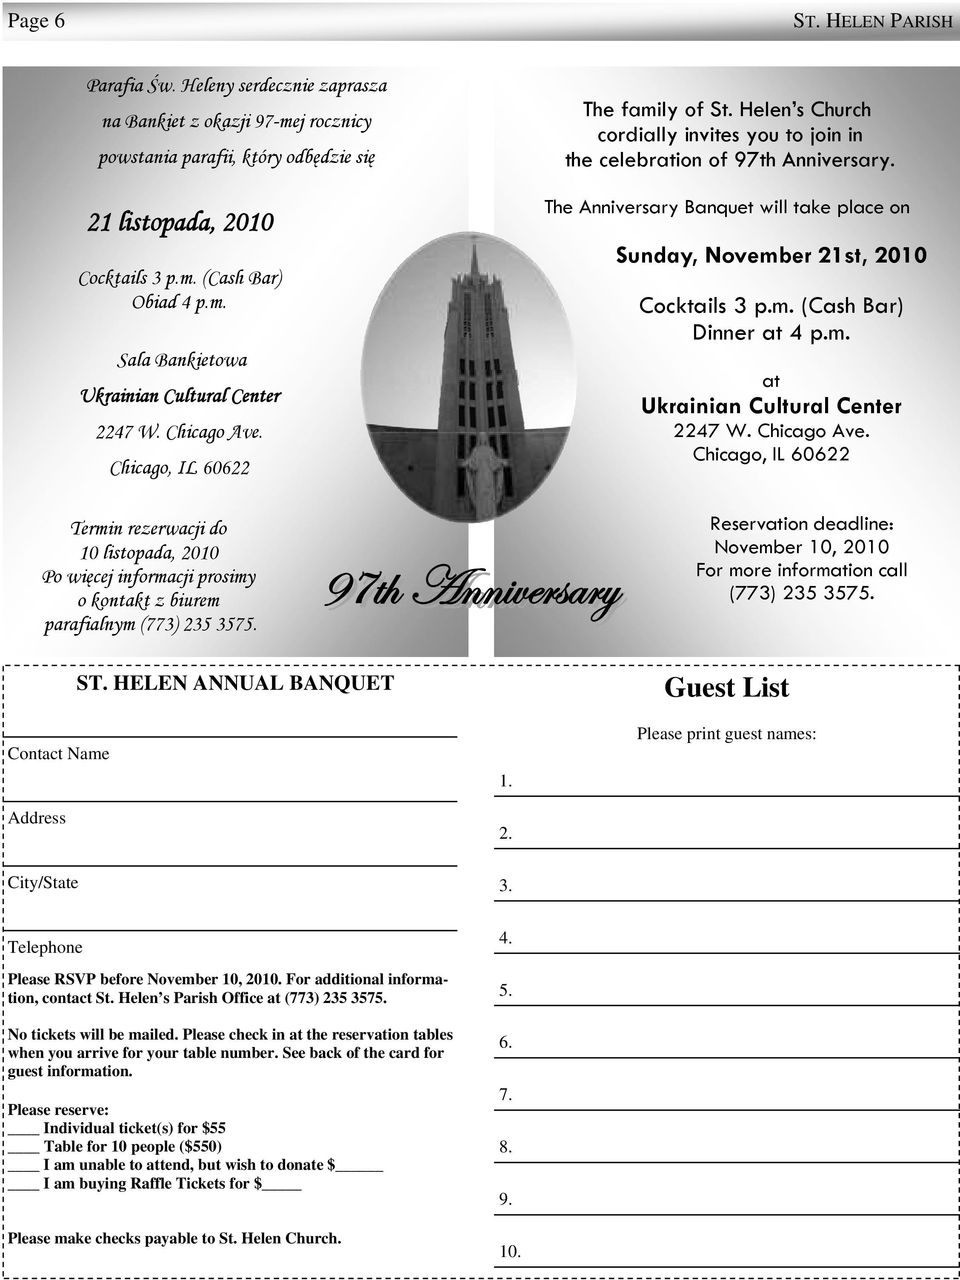 The Anniversary Banquet will take place on Sunday, November 21st, 2010 Cocktails 3 p.m. (Cash Bar) Dinner at 4 p.m. at Ukrainian Cultural Center 2247 W. Chicago Ave.